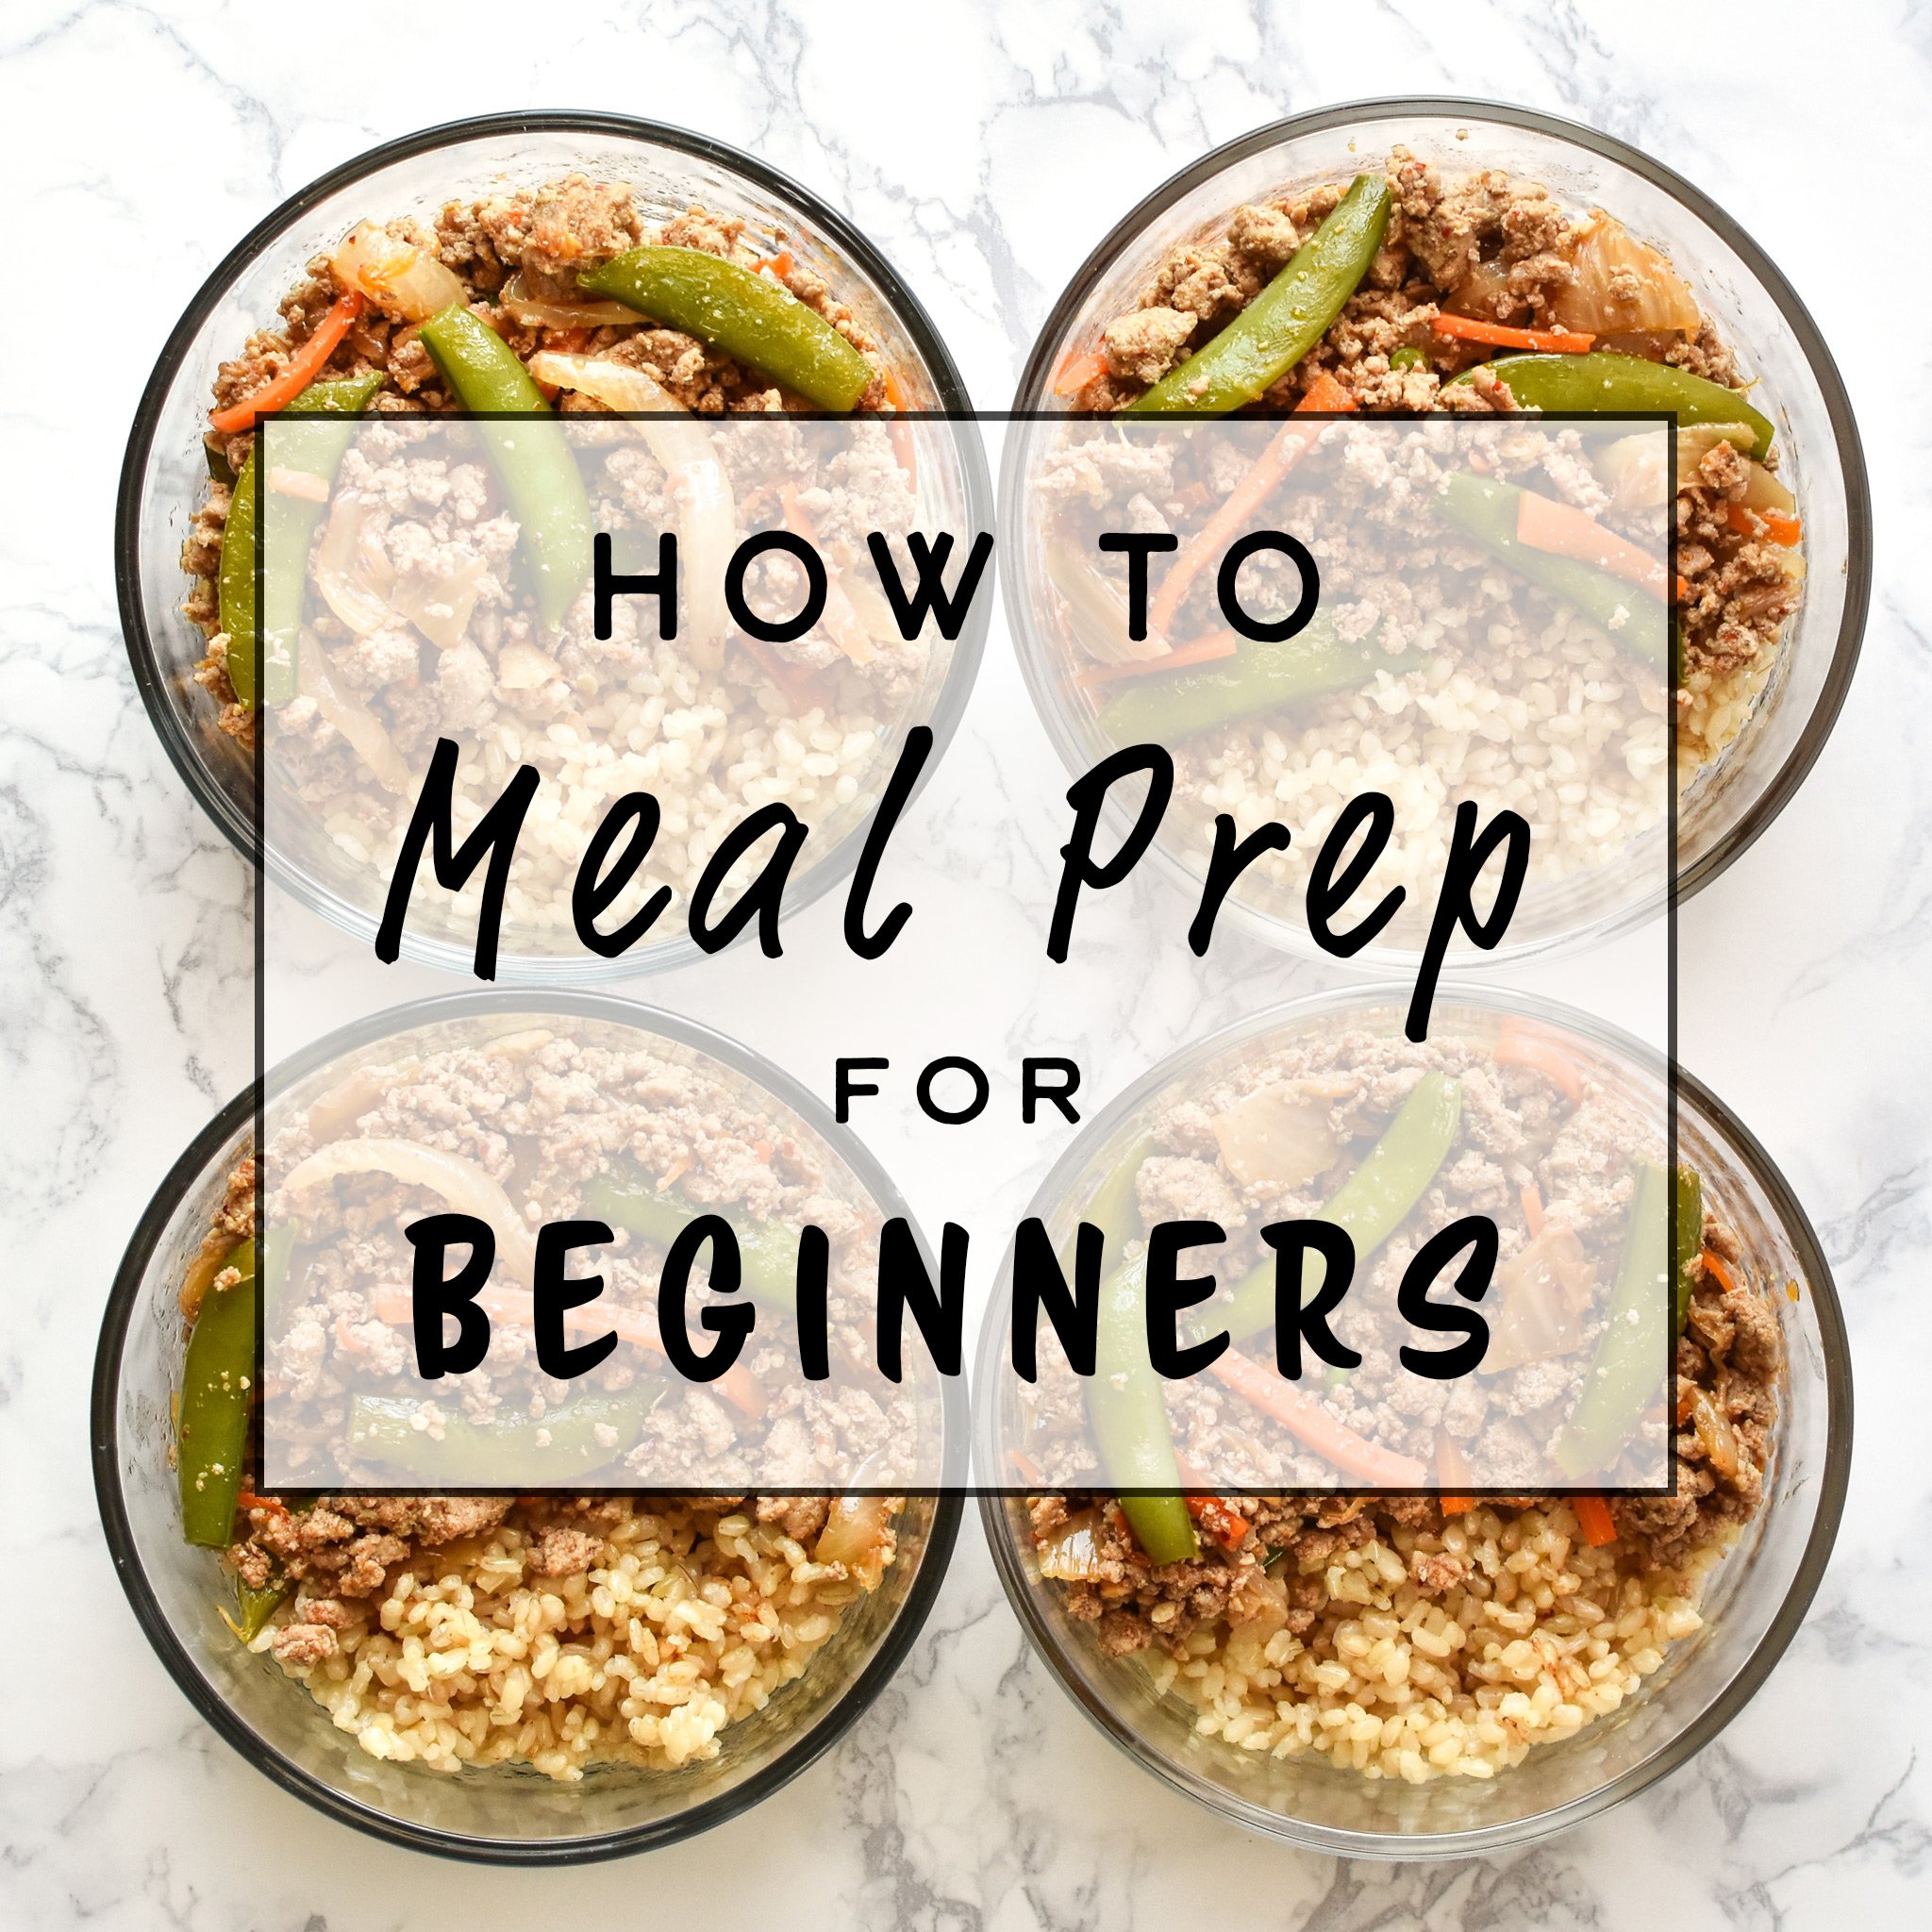 How to Meal Prep for Beginners - A super simple starting place for you to learn meal prep strategies! - ProjectMealPlan.com